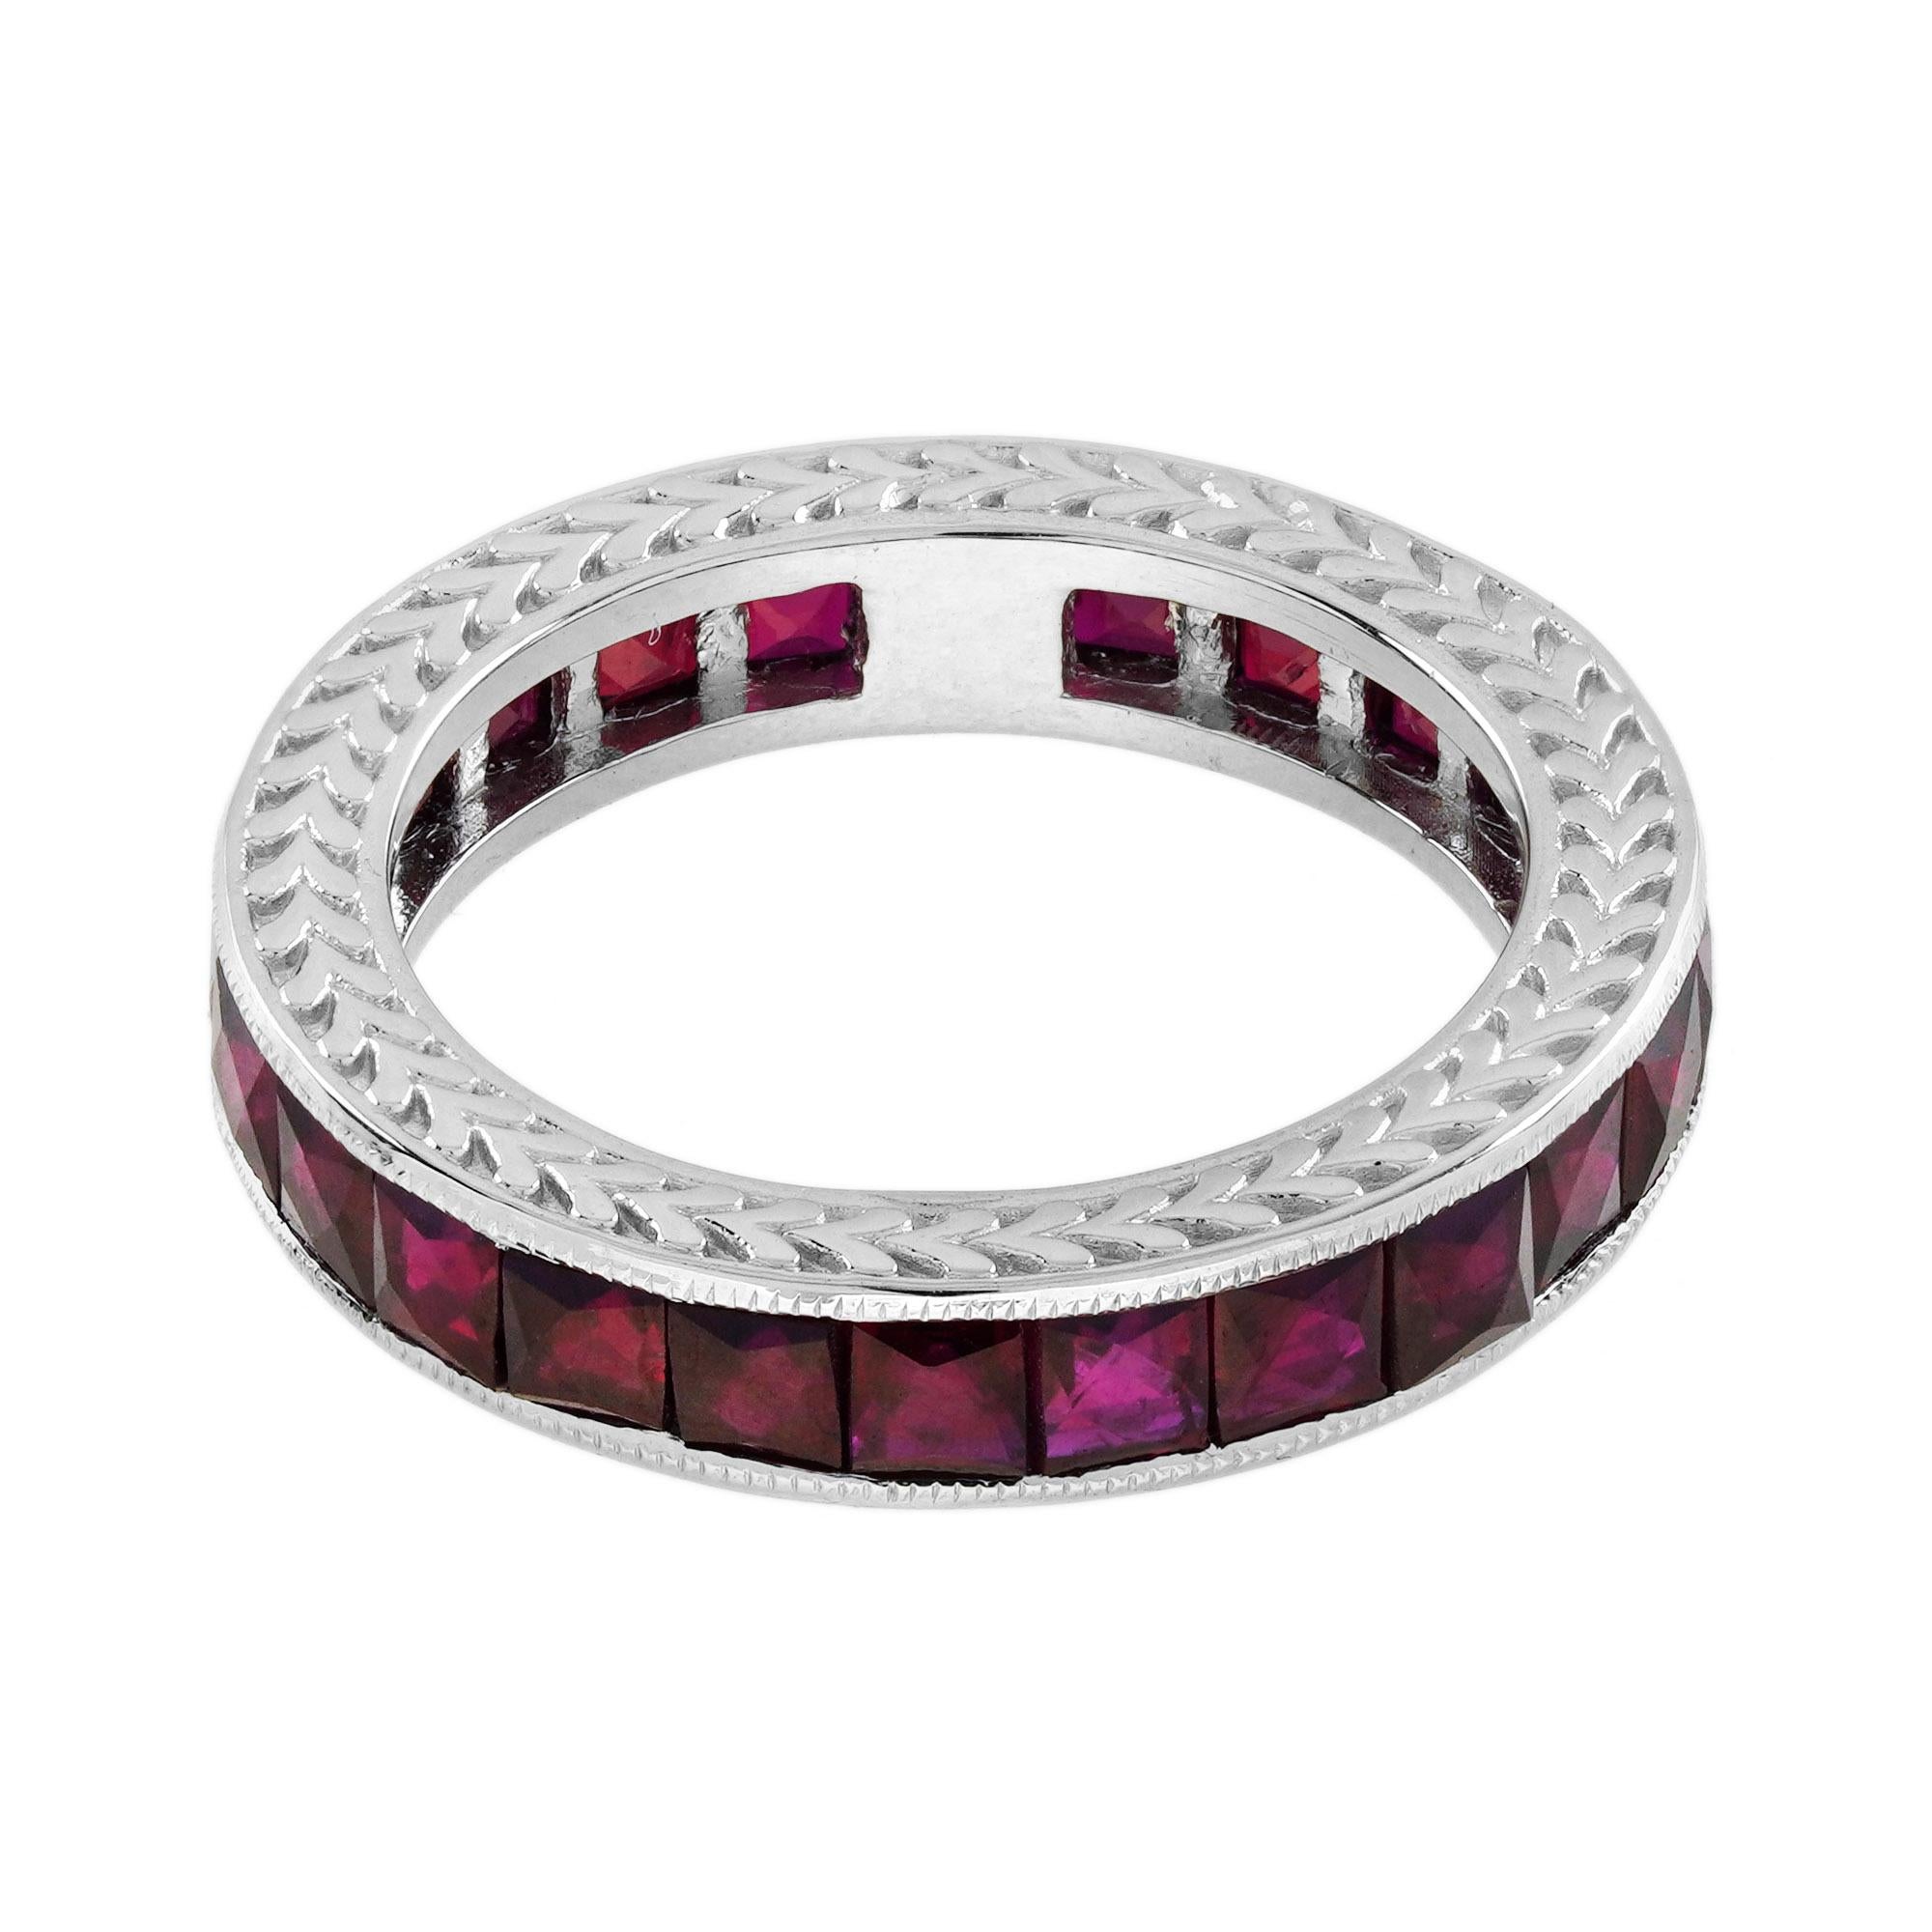 3.37 Ct. Ruby Antique Style Eternity Band Ring in Platinum 950 In New Condition For Sale In Bangkok, TH